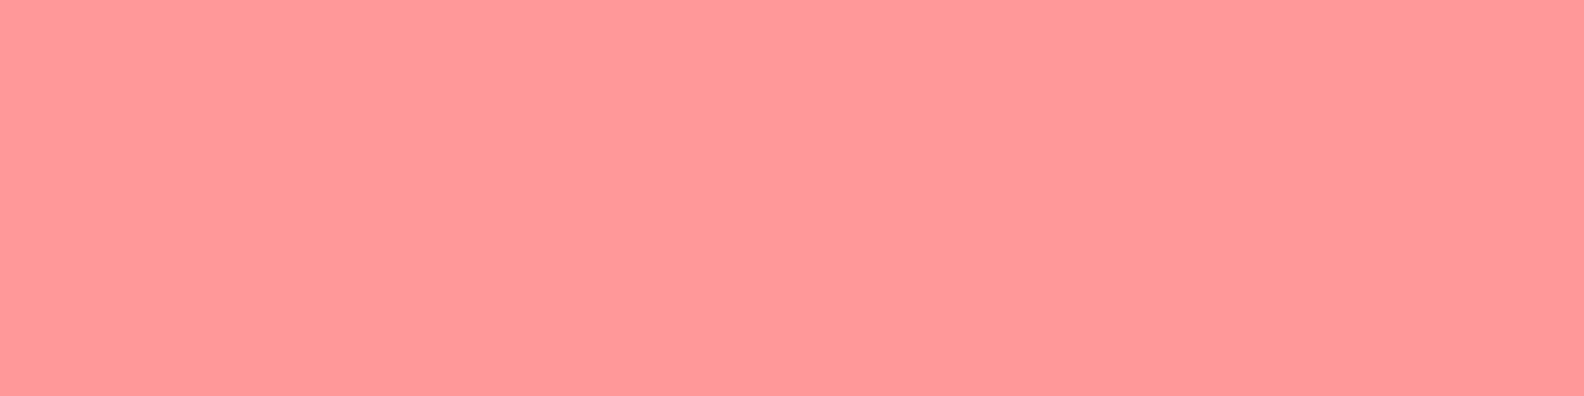 1584x396 Light Salmon Pink Solid Color Background